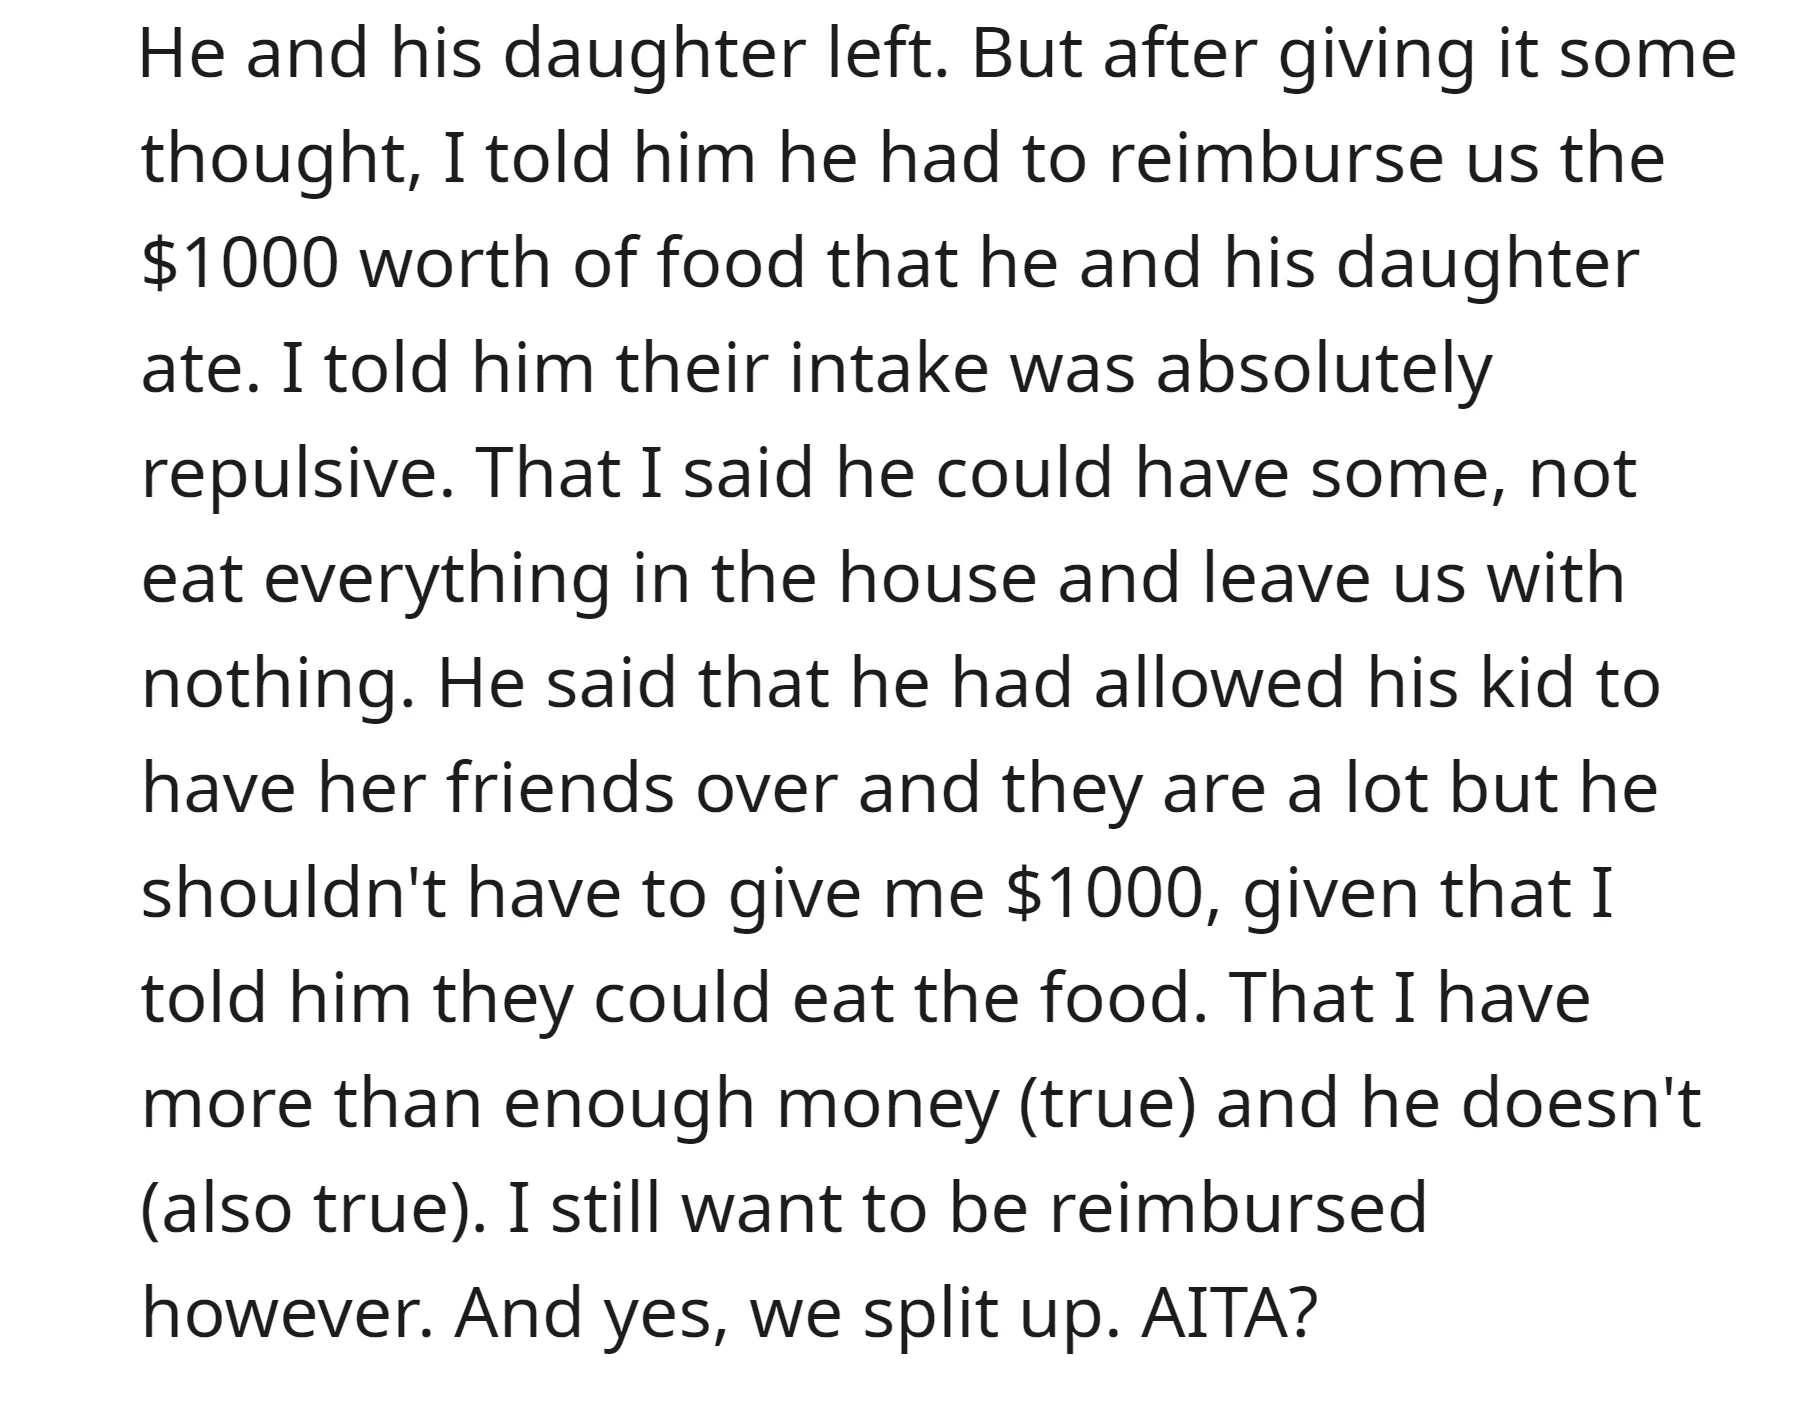 OP asked Jack and his daughter to leave and requested reimbursement for the $1000 worth of groceries